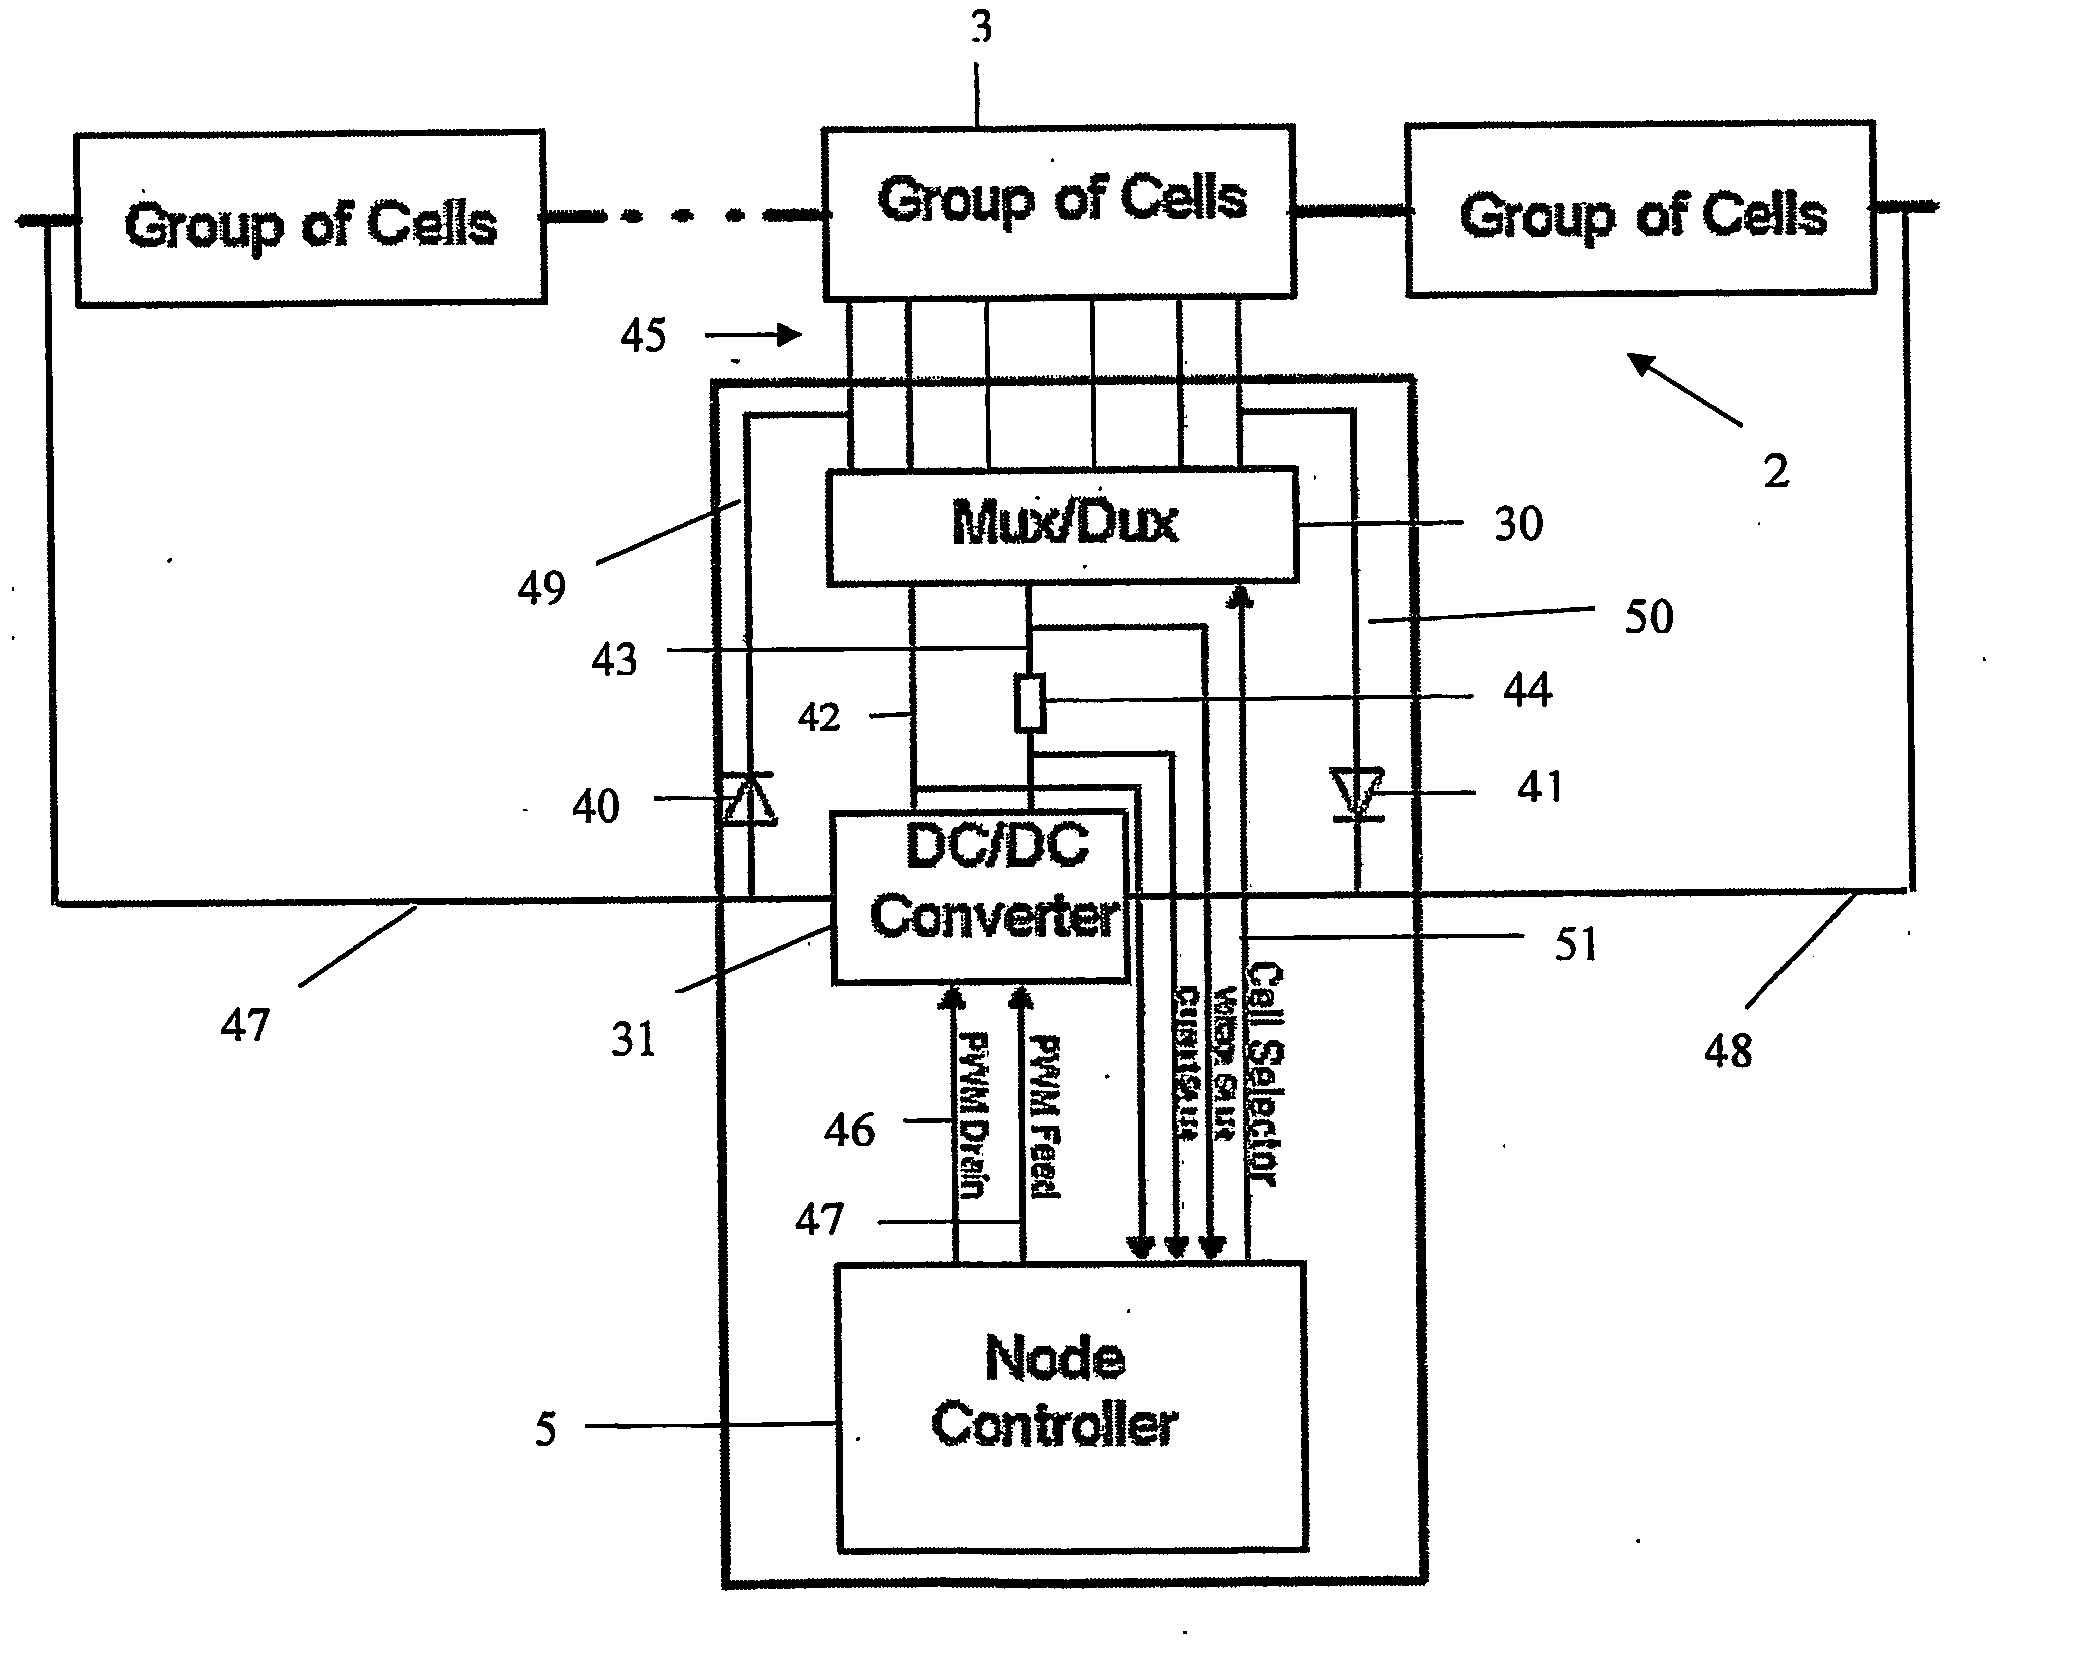 Modular battery management apparatus with cell sensing and energy redistribution capabilities